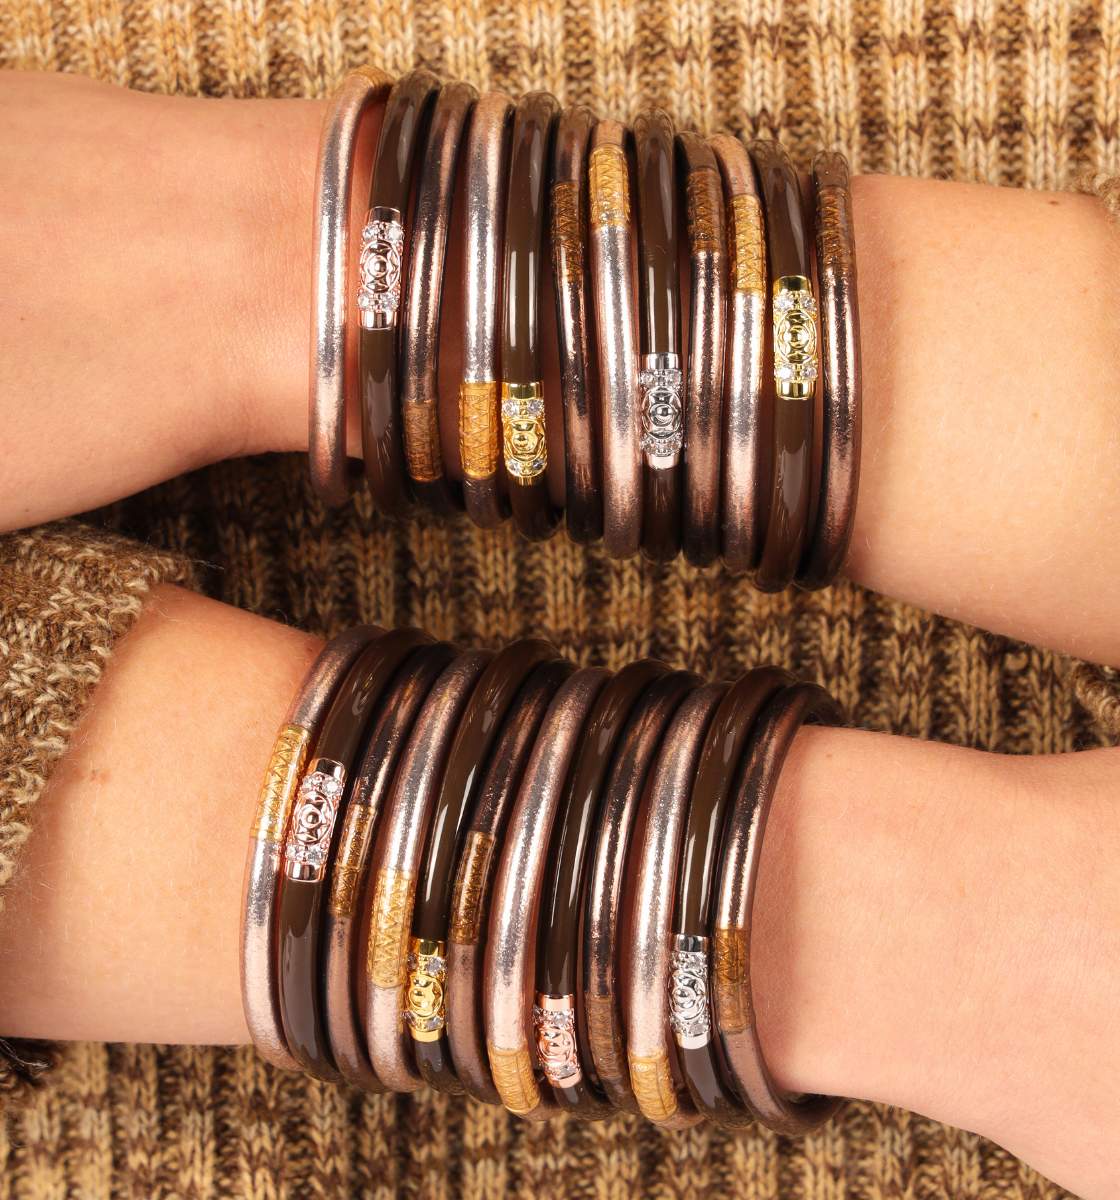 Fall Jewelry | Fall Fashion Trends | Chocolate Three Kings All Weather Bangles | Fawn Ombre Set of All Weather Bangles | BuDhaGirl